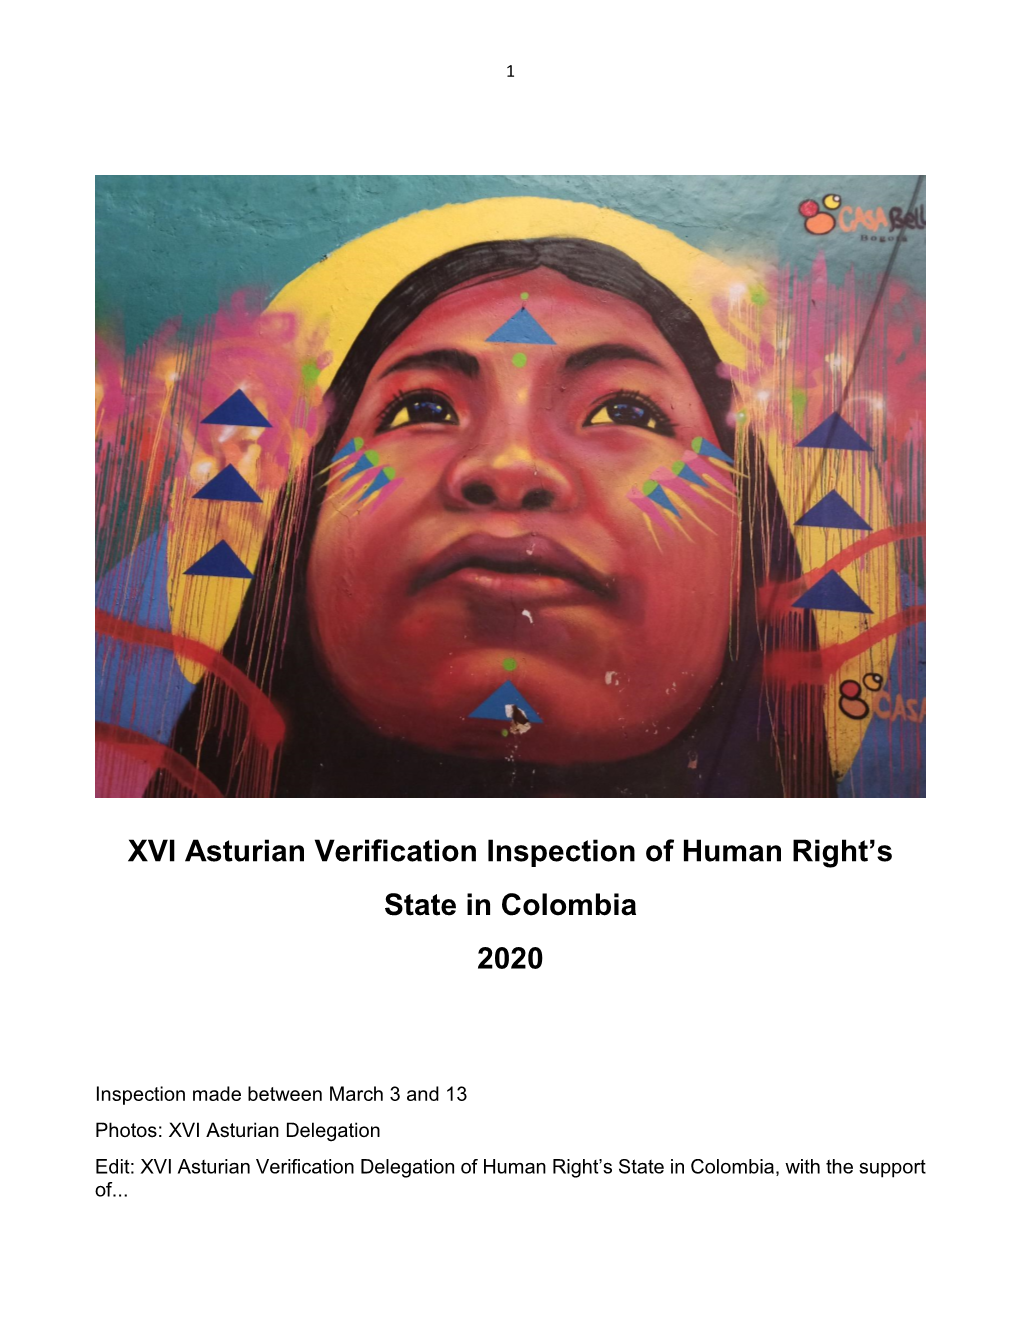 XVI Asturian Verification Inspection of Human Right's State in Colombia